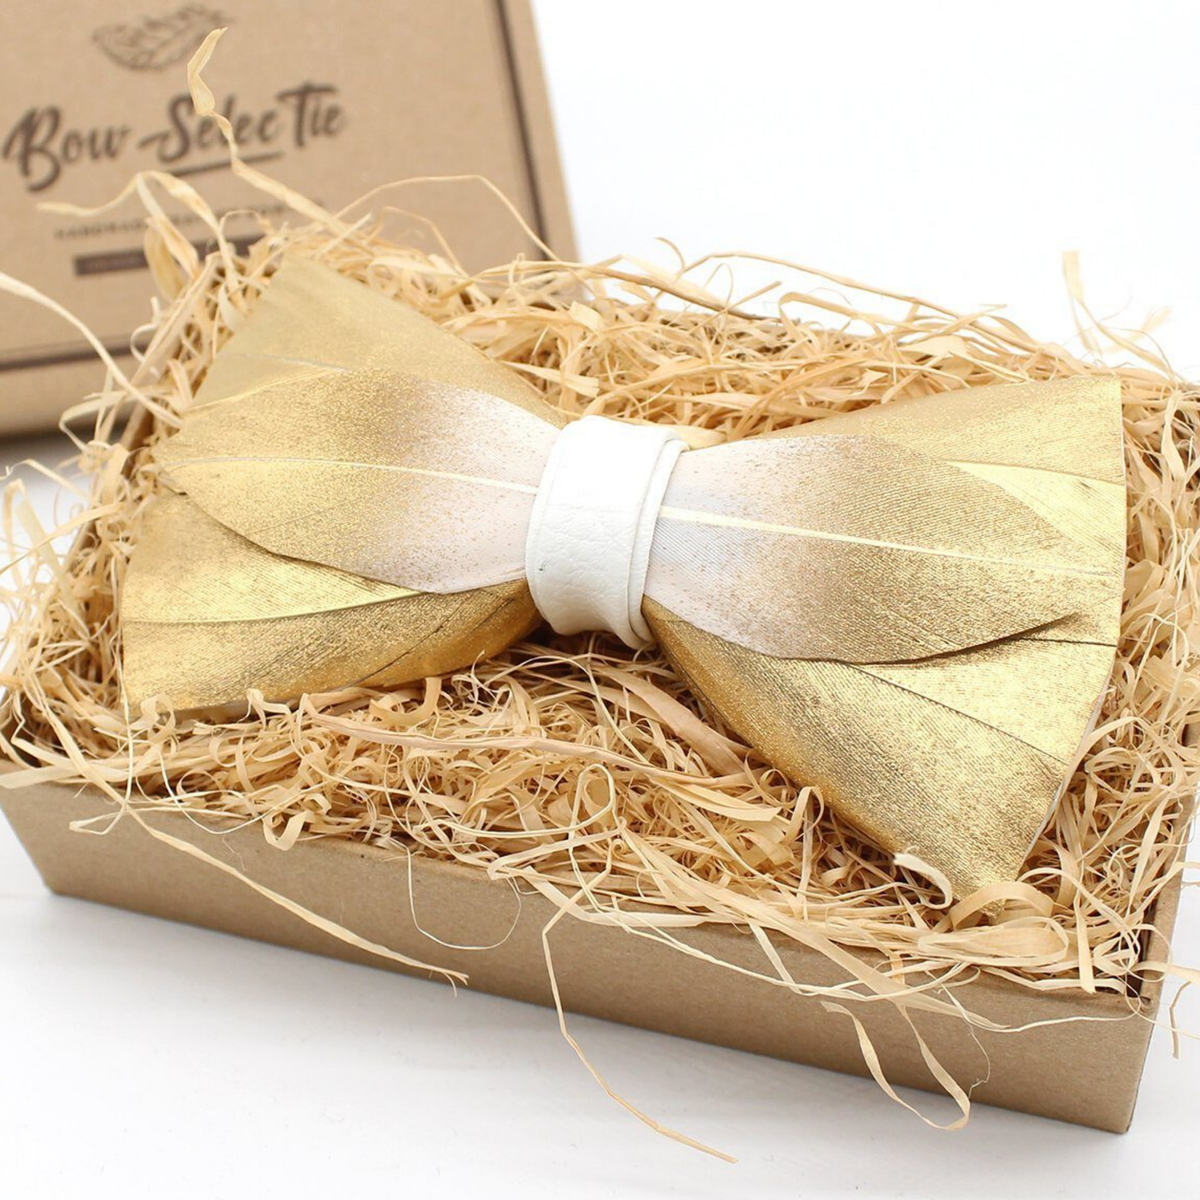 FEATHER BOW TIE GOLD HANDCRAFTED